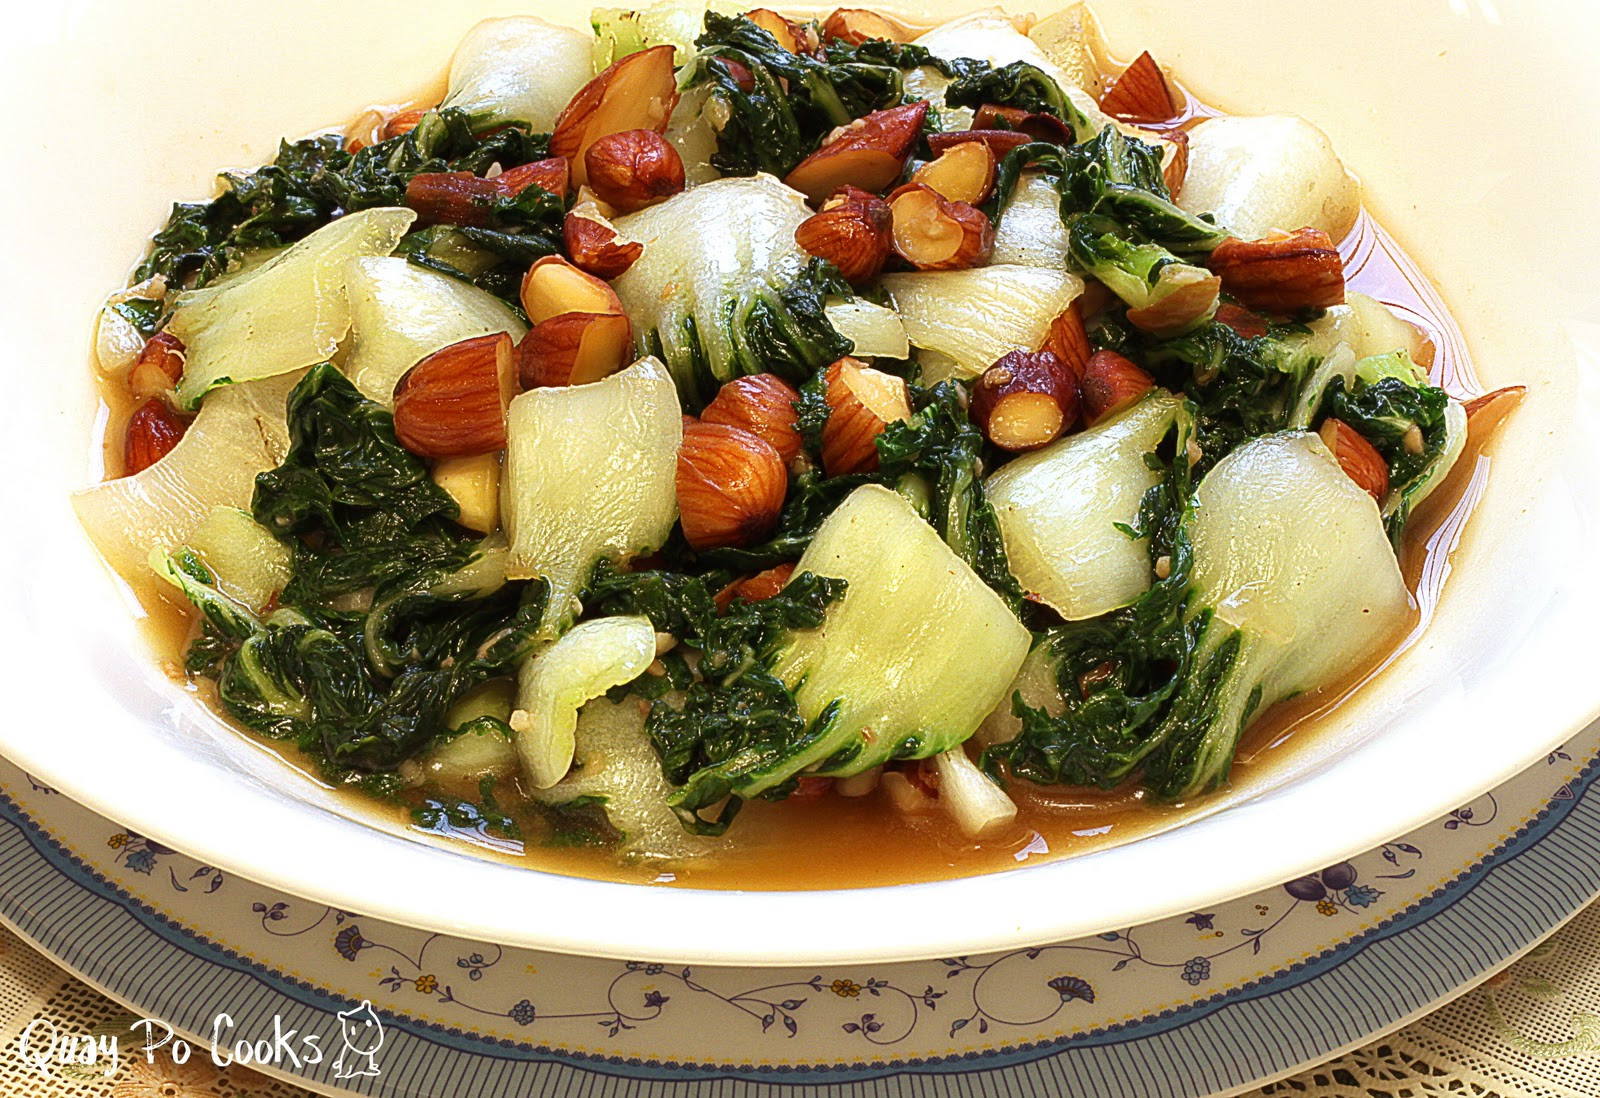 Bok Choy Side Dishes
 Quay Po Cooks Stir fry baby bok choy with almond an